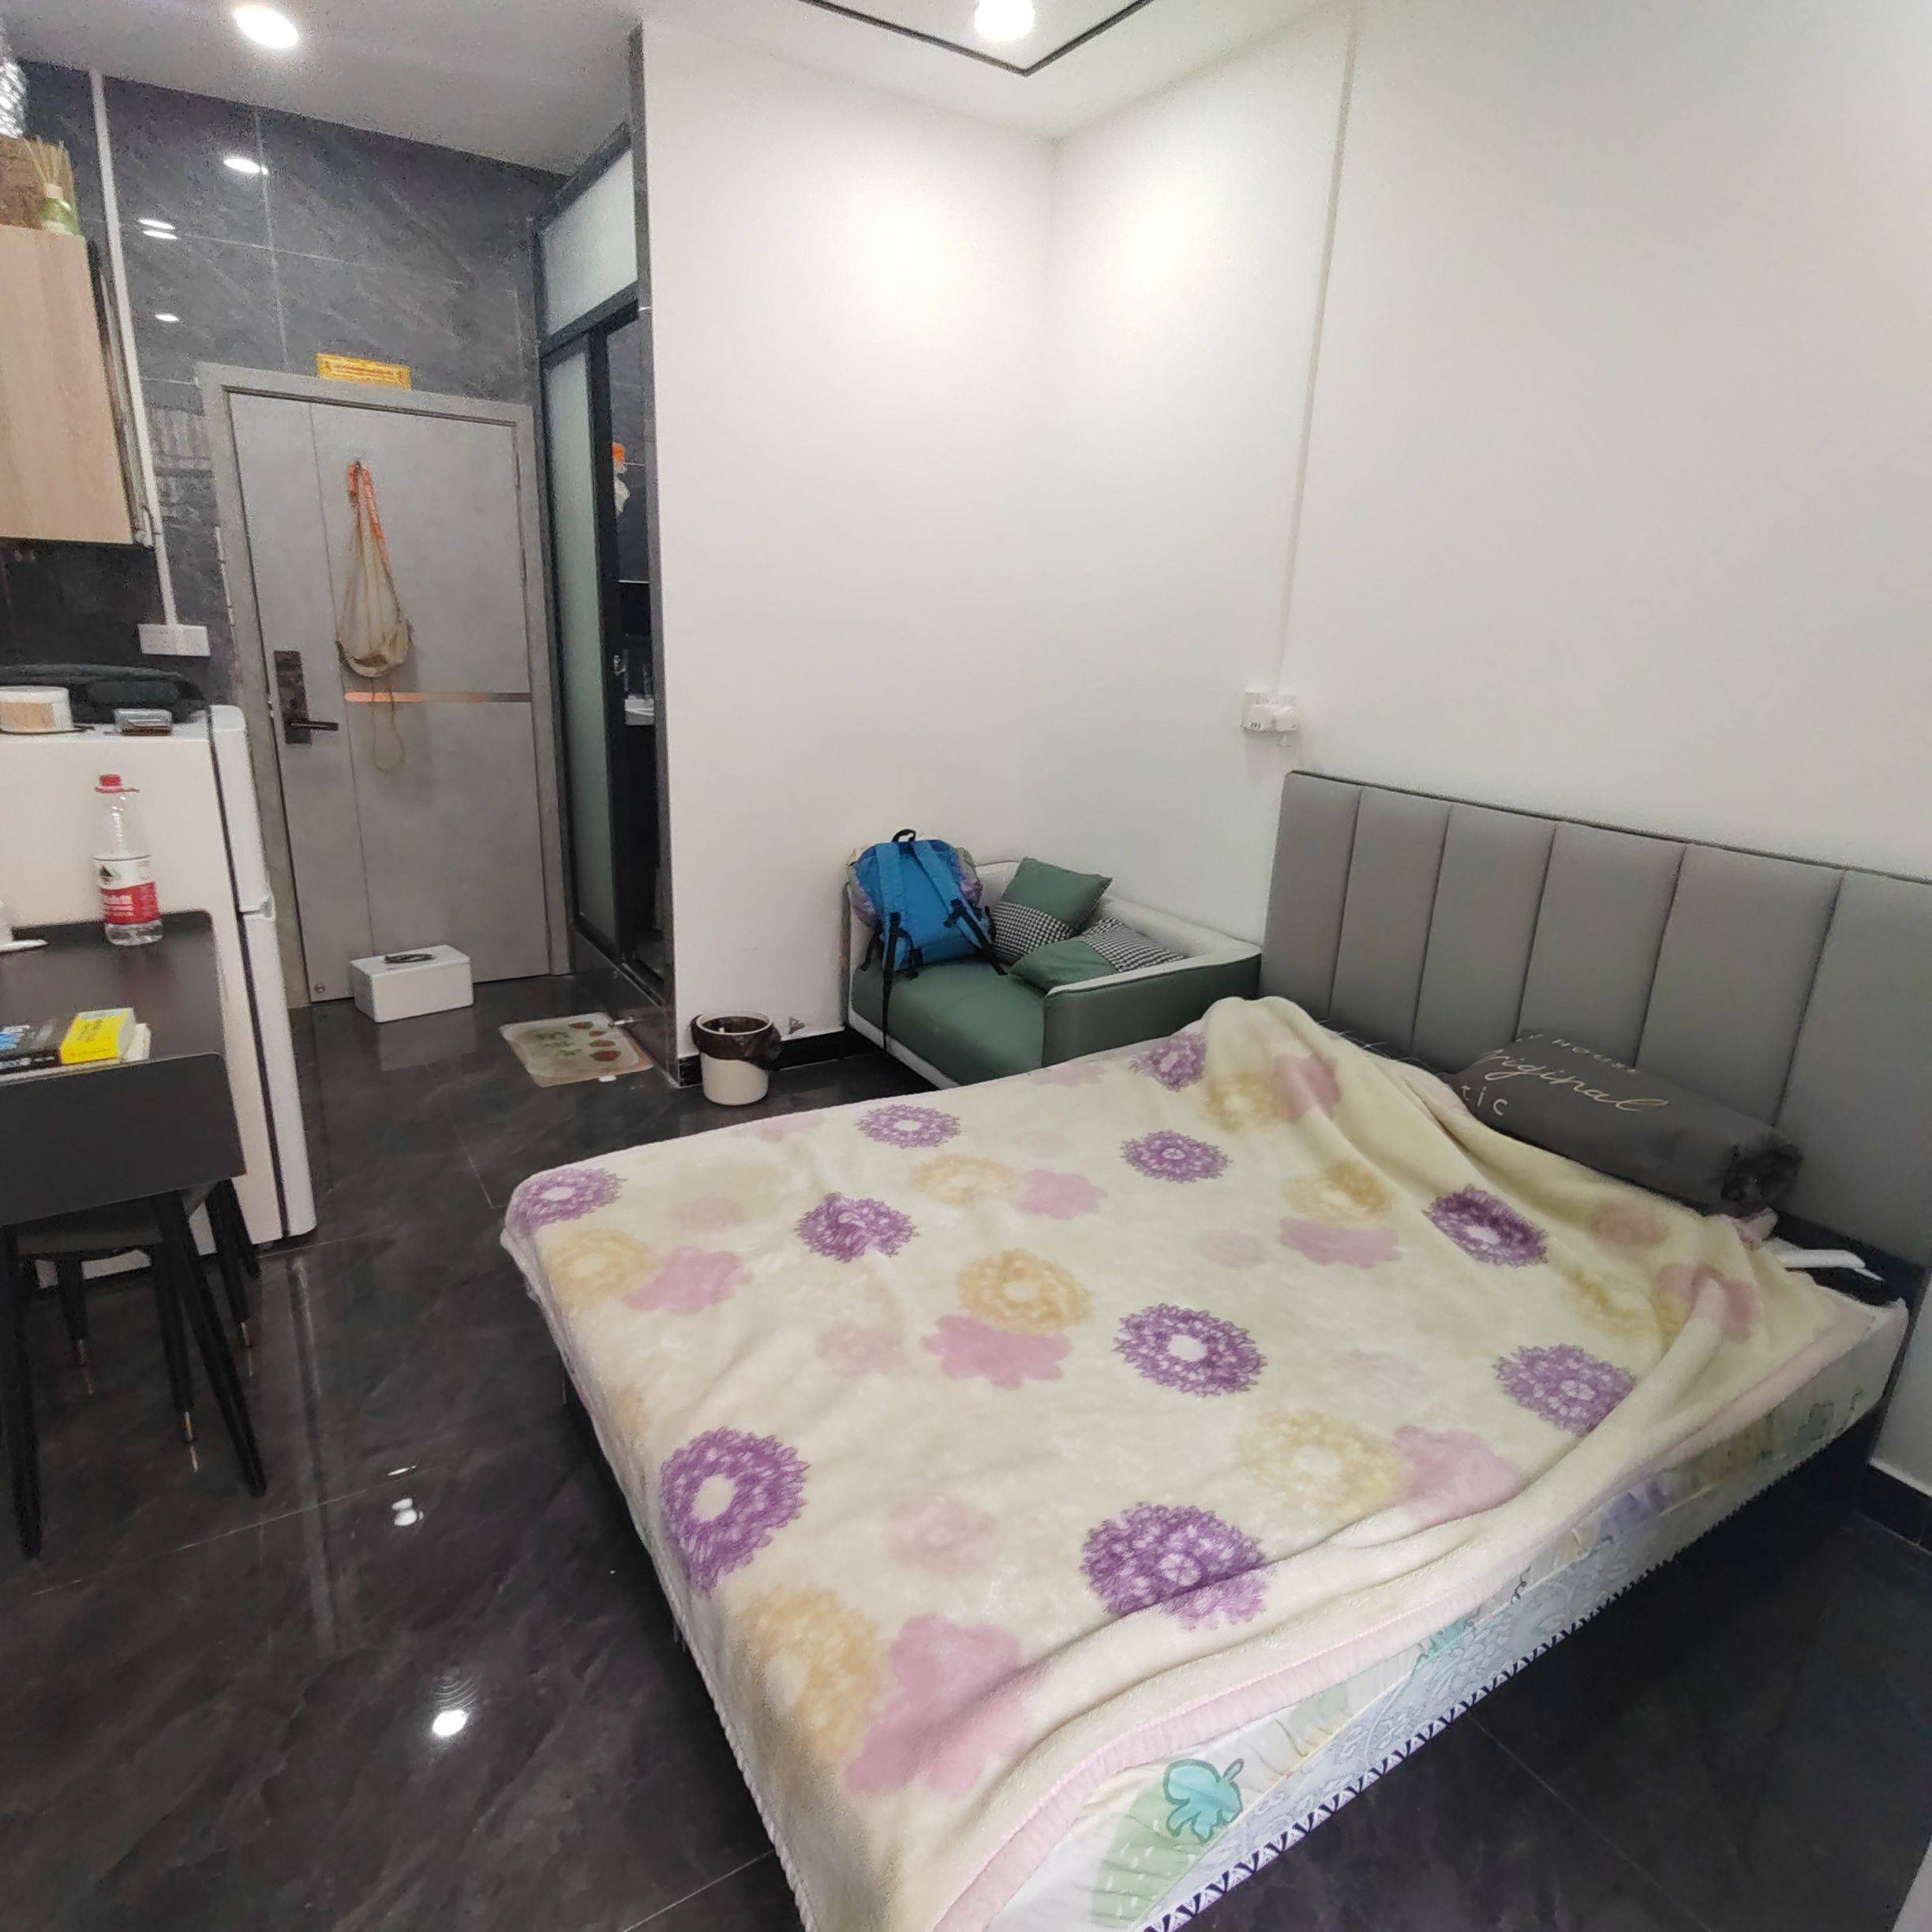 Guangzhou-Tianhe-Cozy Home,Clean&Comfy,No Gender Limit,Hustle & Bustle,“Friends”,Chilled